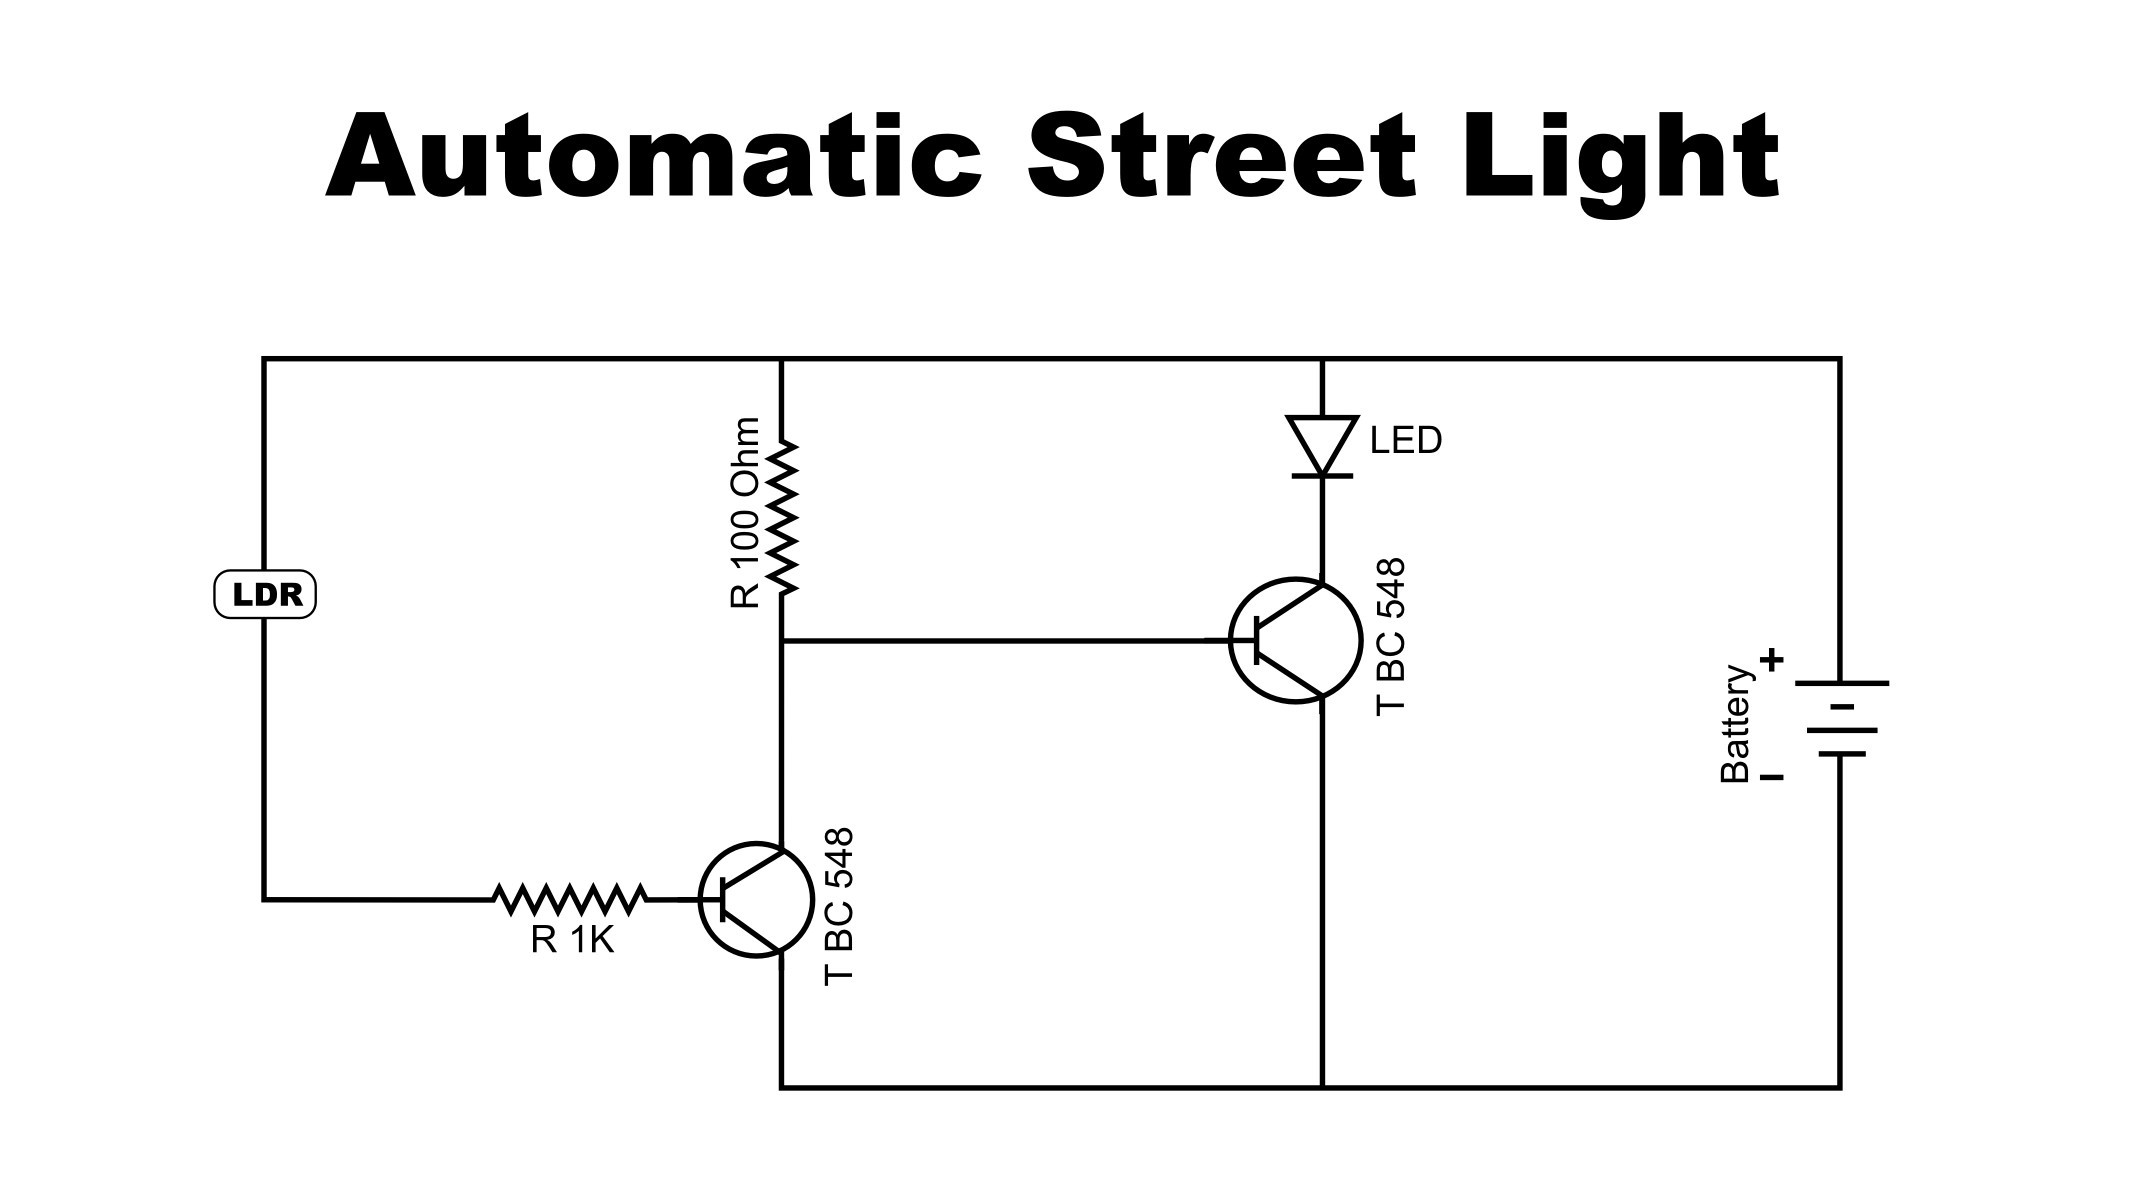 Solar Street Light Circuit Diagram diy Automatic Street Light with soldering Learn by Watch Circuit